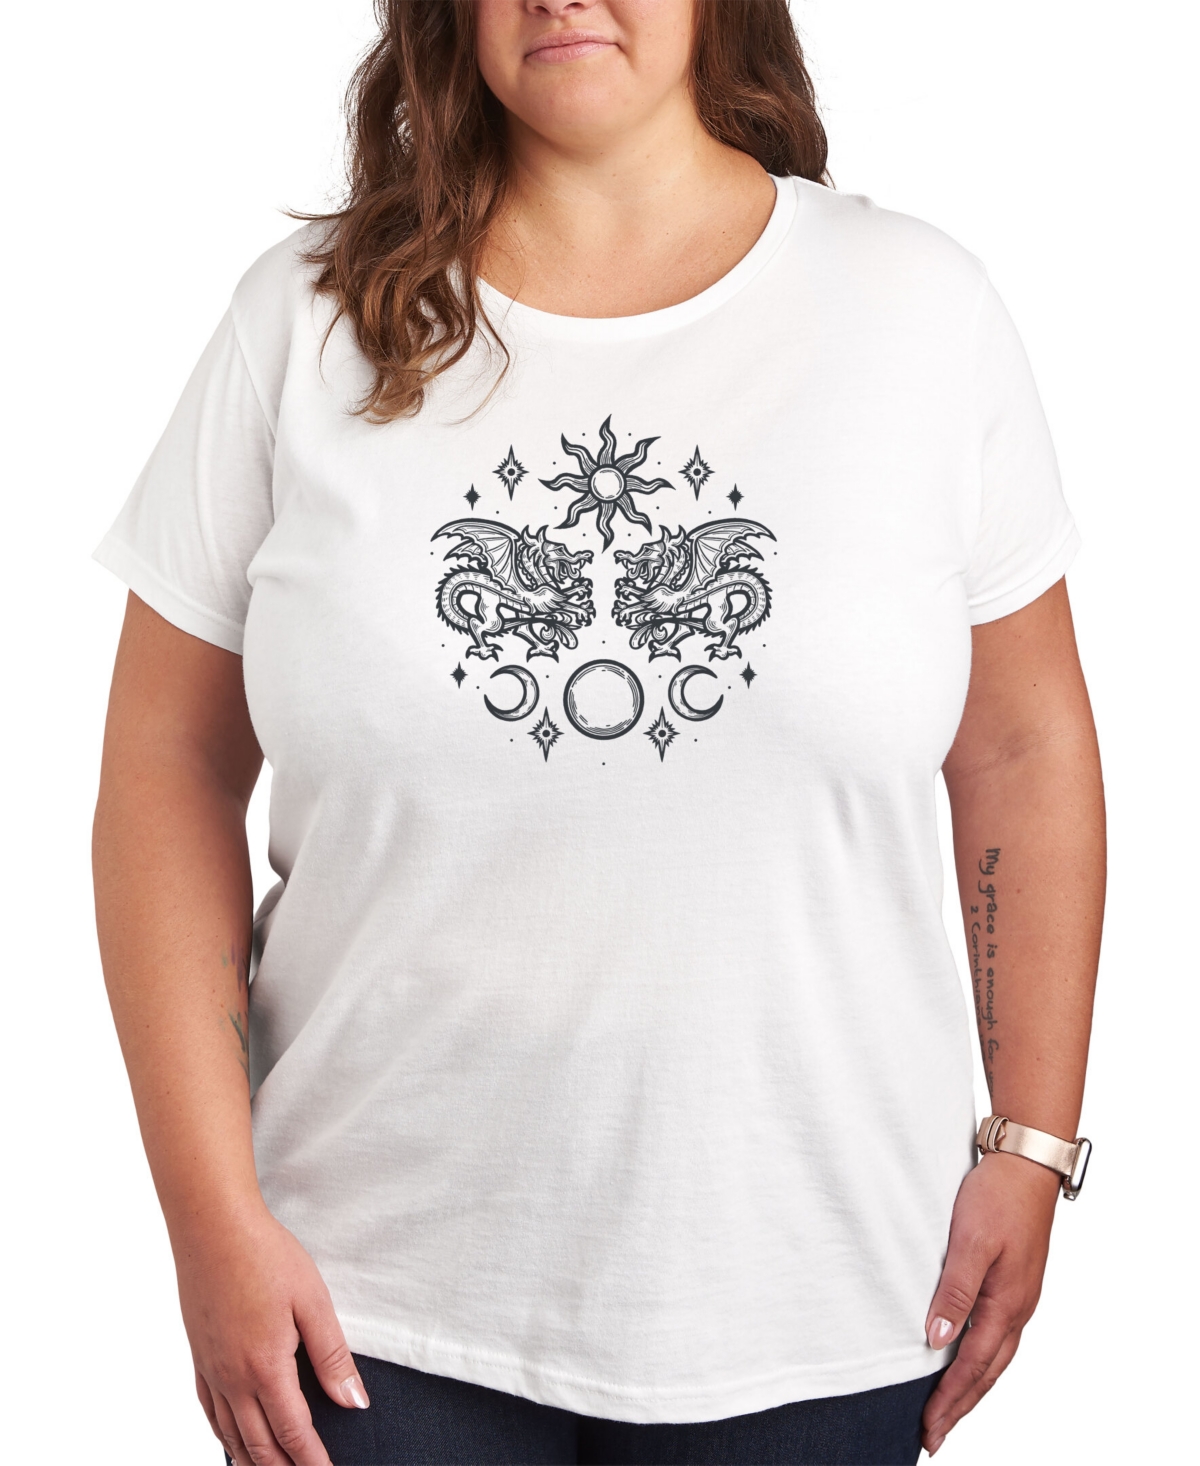 Air Waves Trendy Plus Size Celestial Graphic T-shirt - White